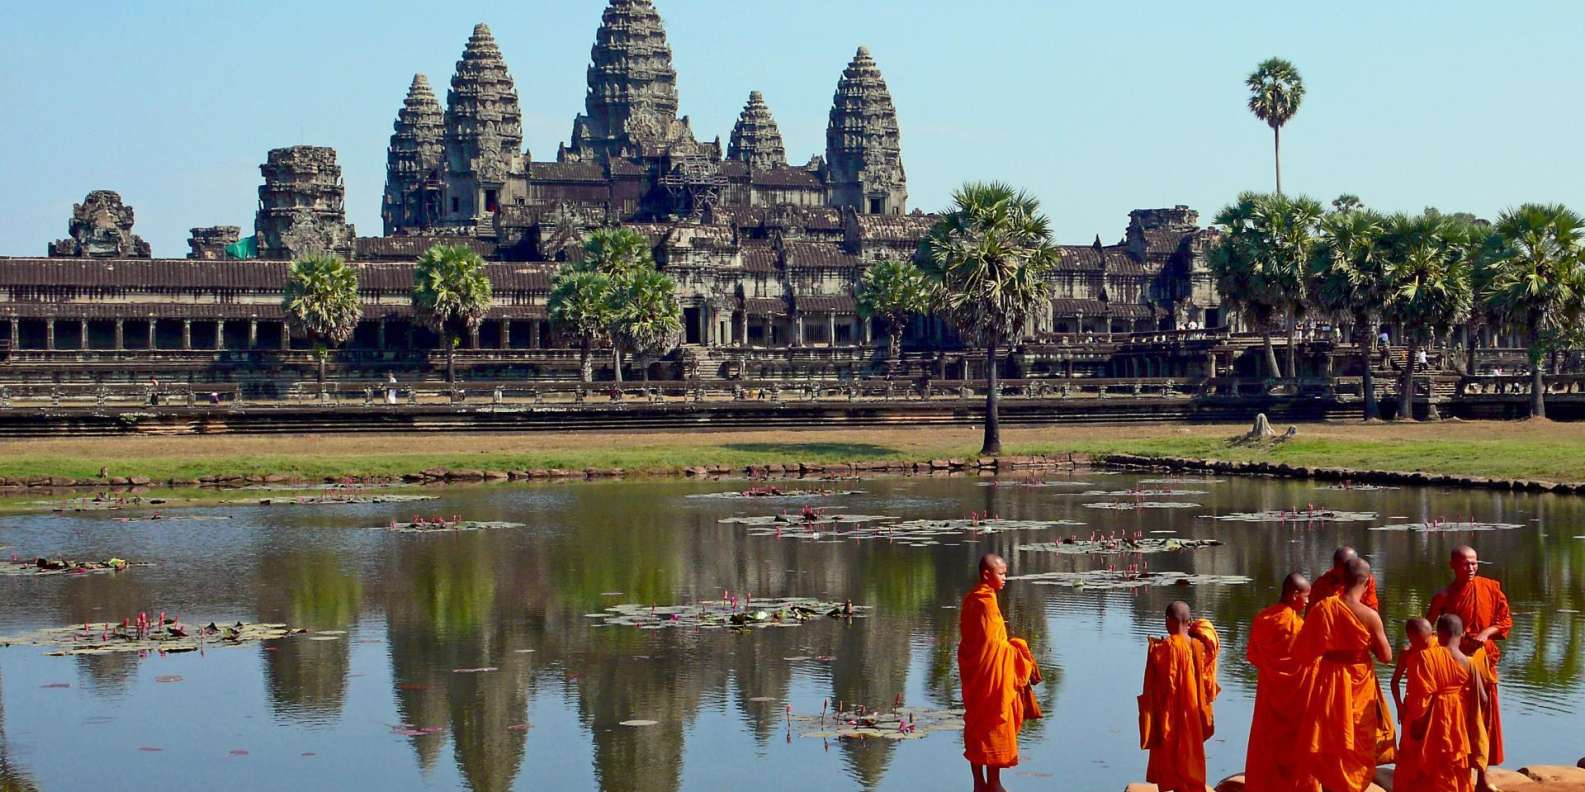 things to do in Siem Reap